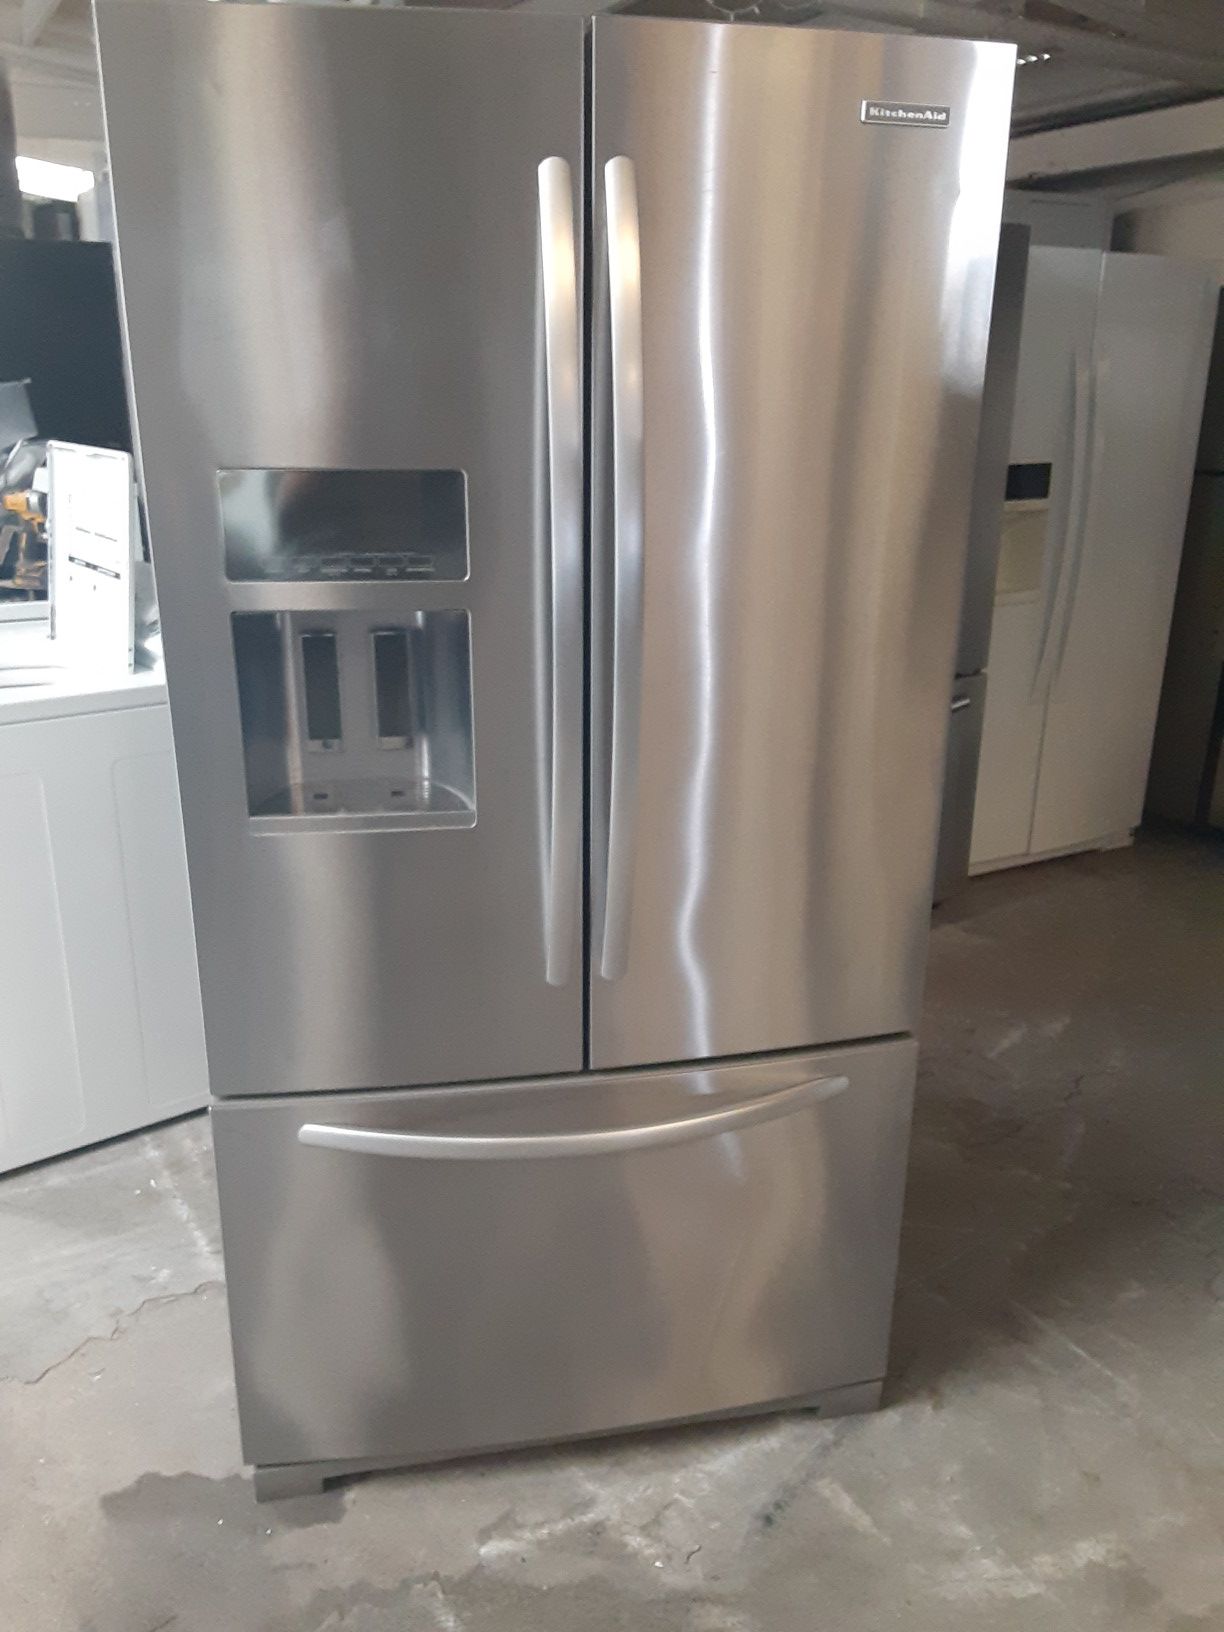 Refrigerator kitchen Aid good condition 3 months warranty delivery and install